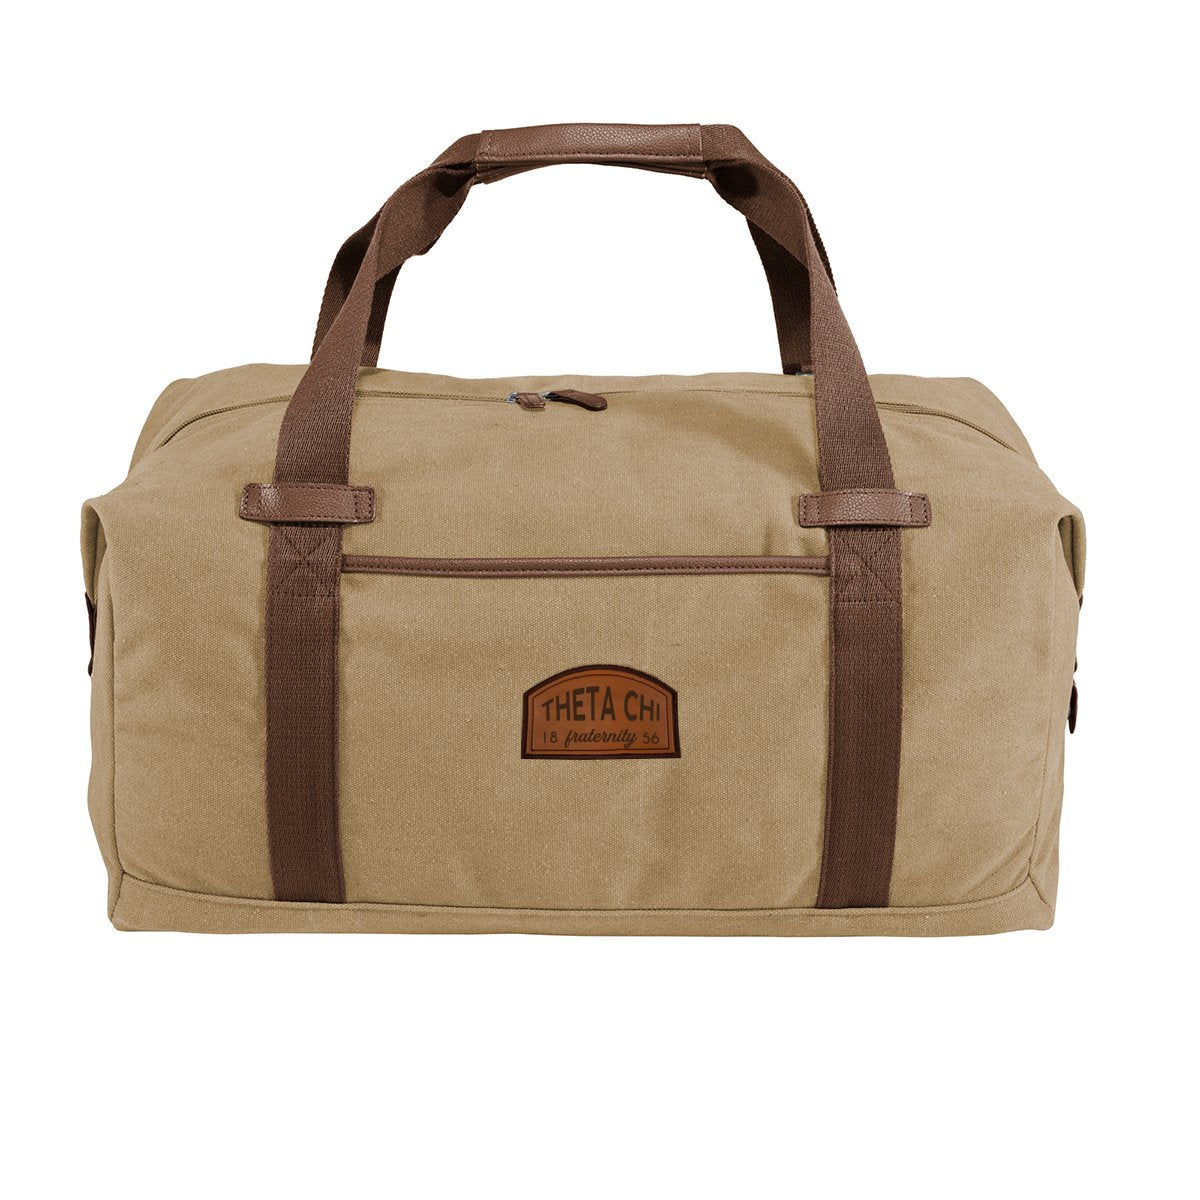 Theta Chi Khaki Canvas Duffel With Leather Patch | Theta Chi | Bags > Duffle bags